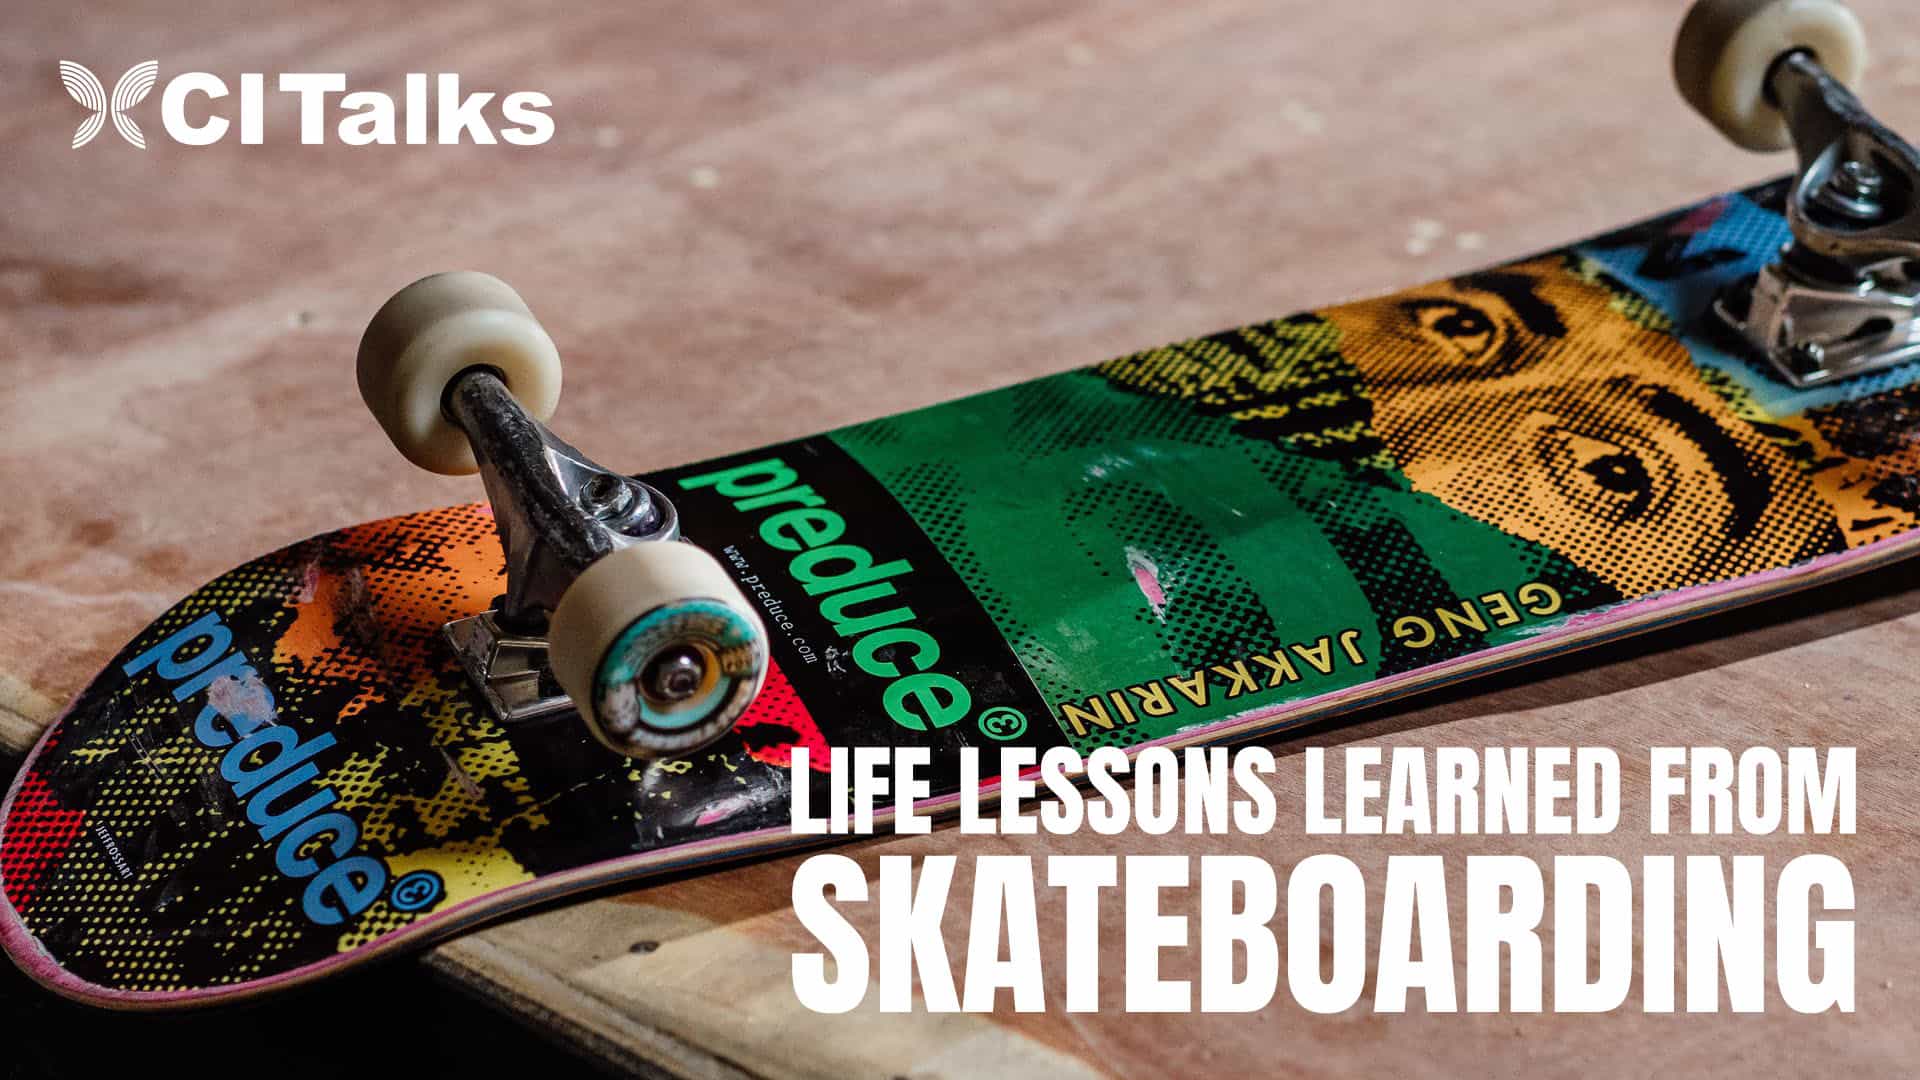 Life Lessons Learned from Skateboarding